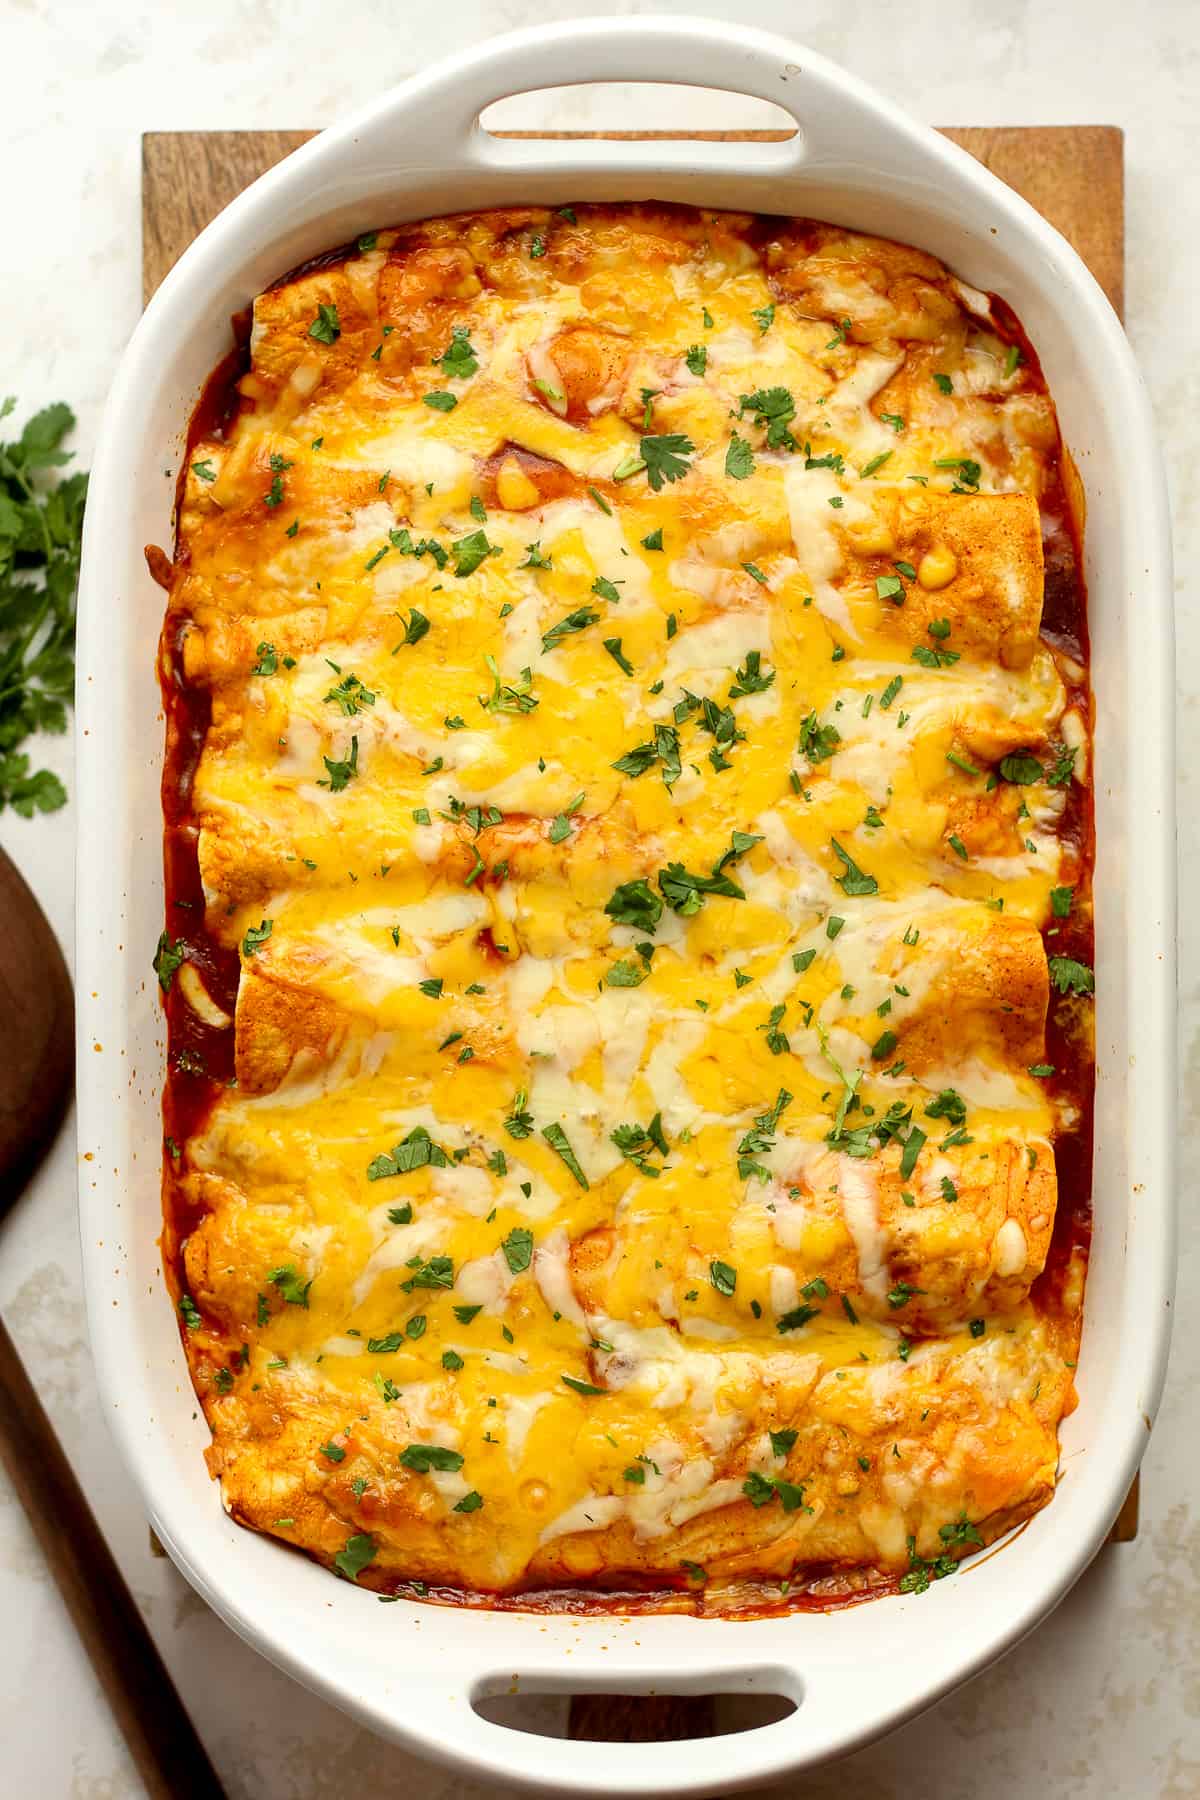 Shredded Beef Enchiladas with Red Sauce